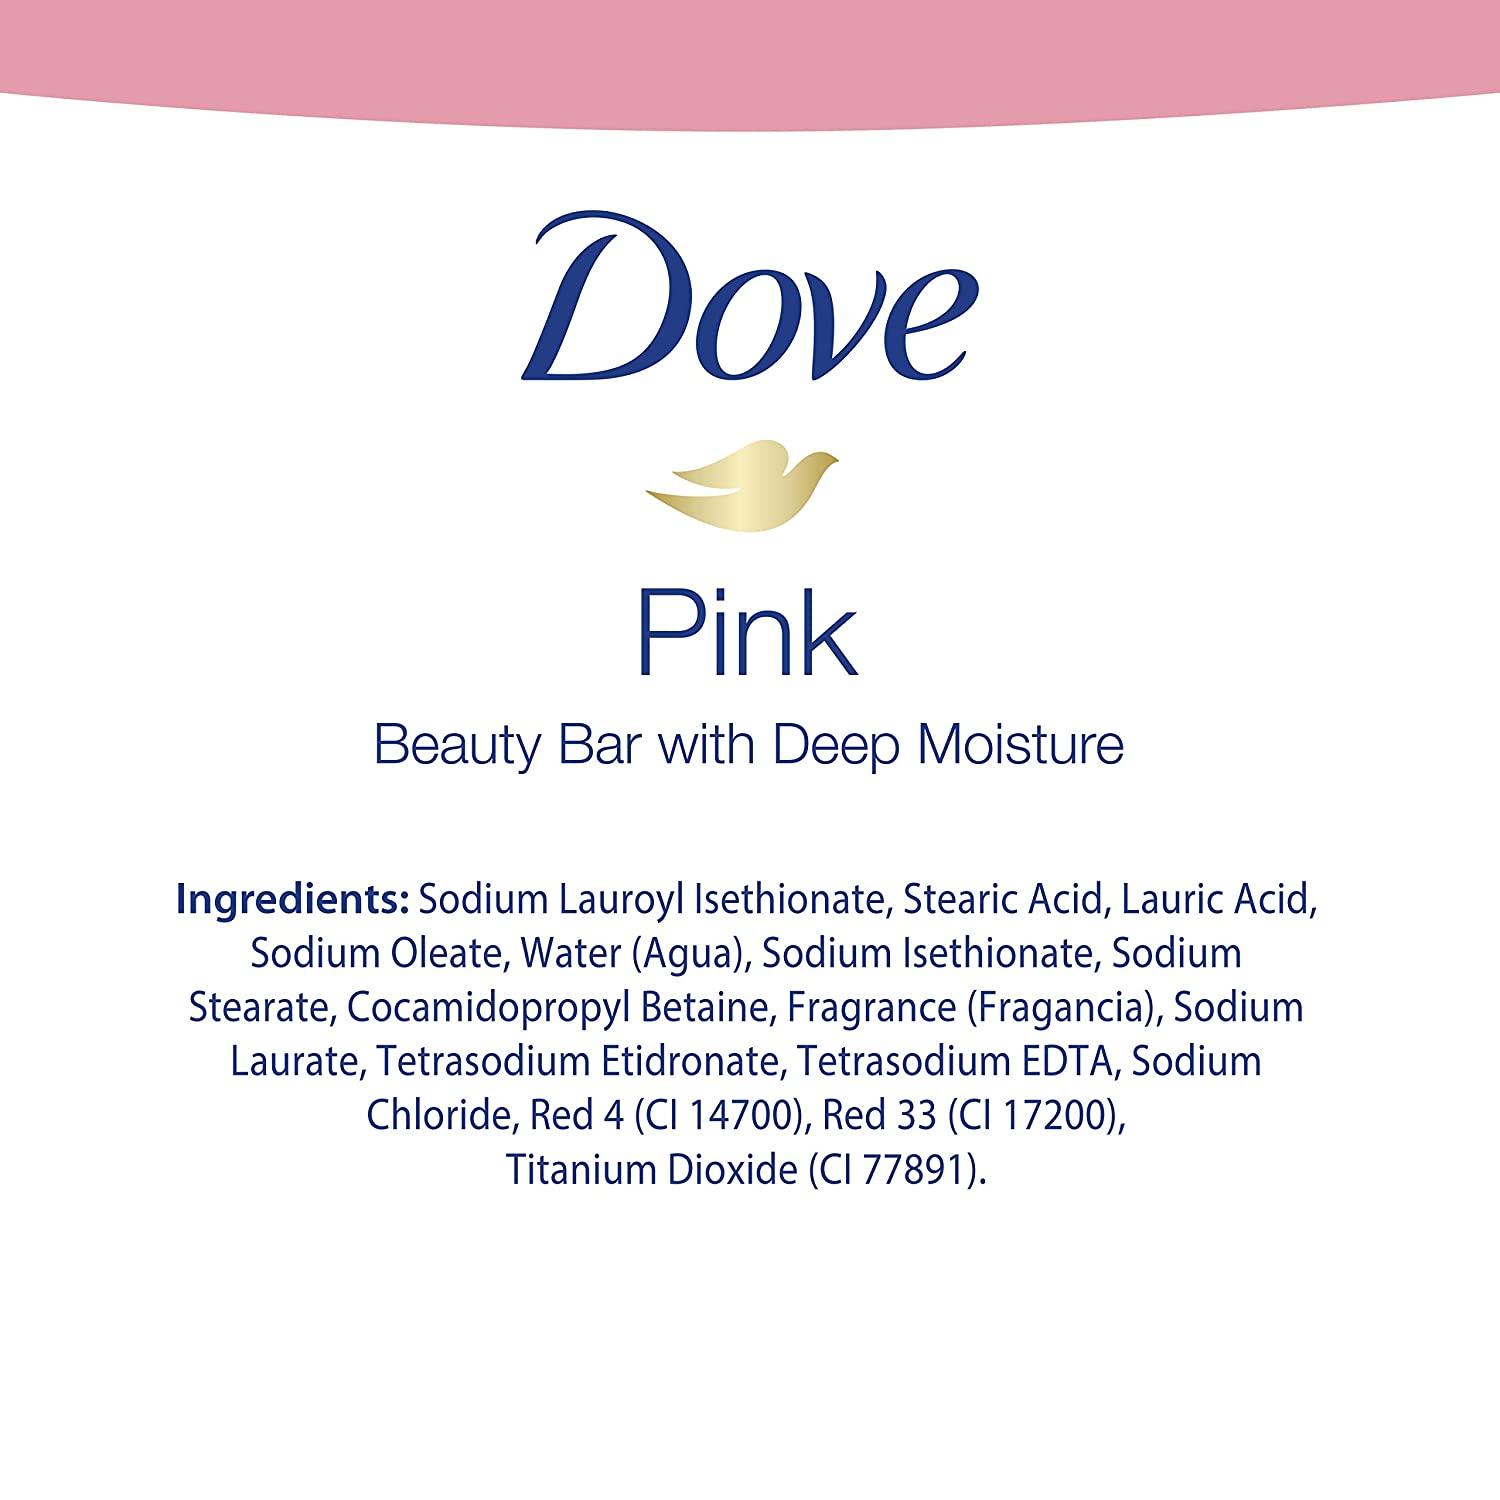 Dove Men+Care Body and Face Bar, Deep Clean, Classic Scent - 8 pack, 4 oz bars